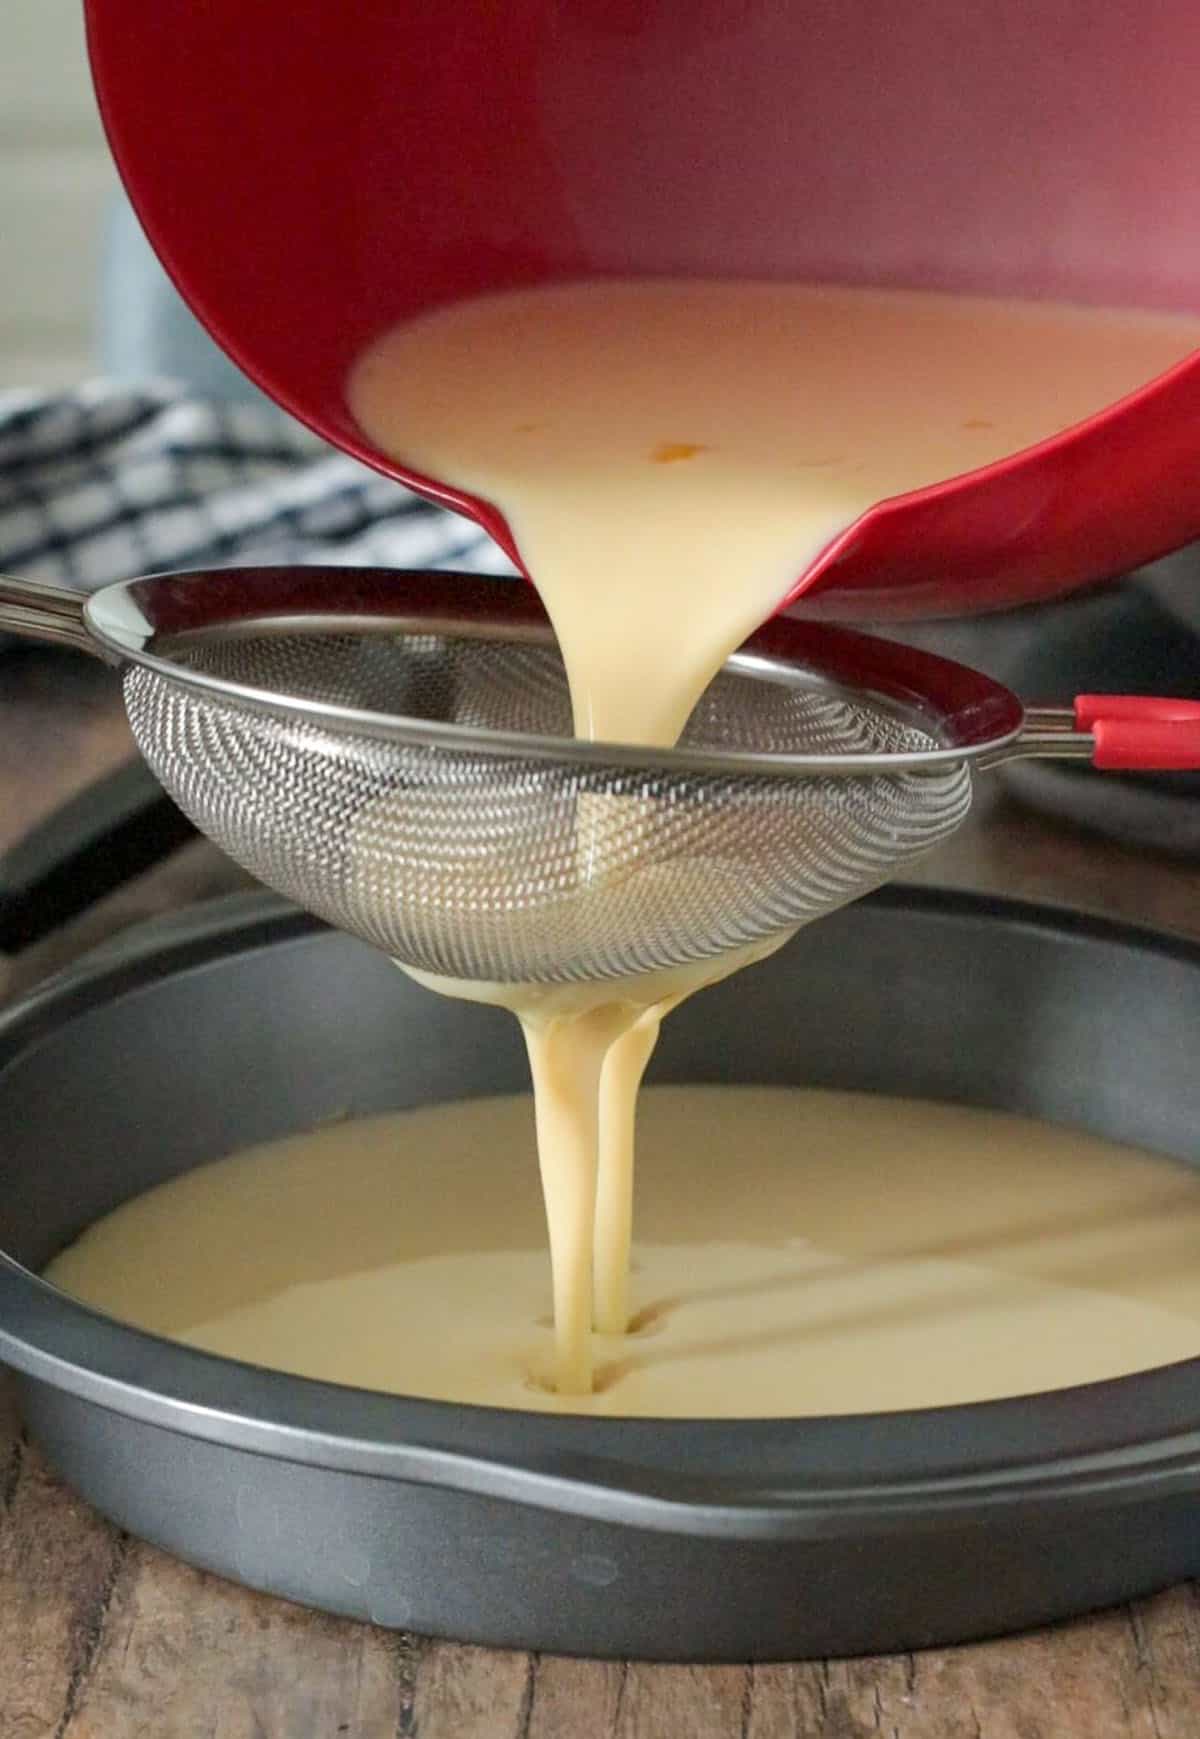 Pouring the custard over the caramel in the pan.